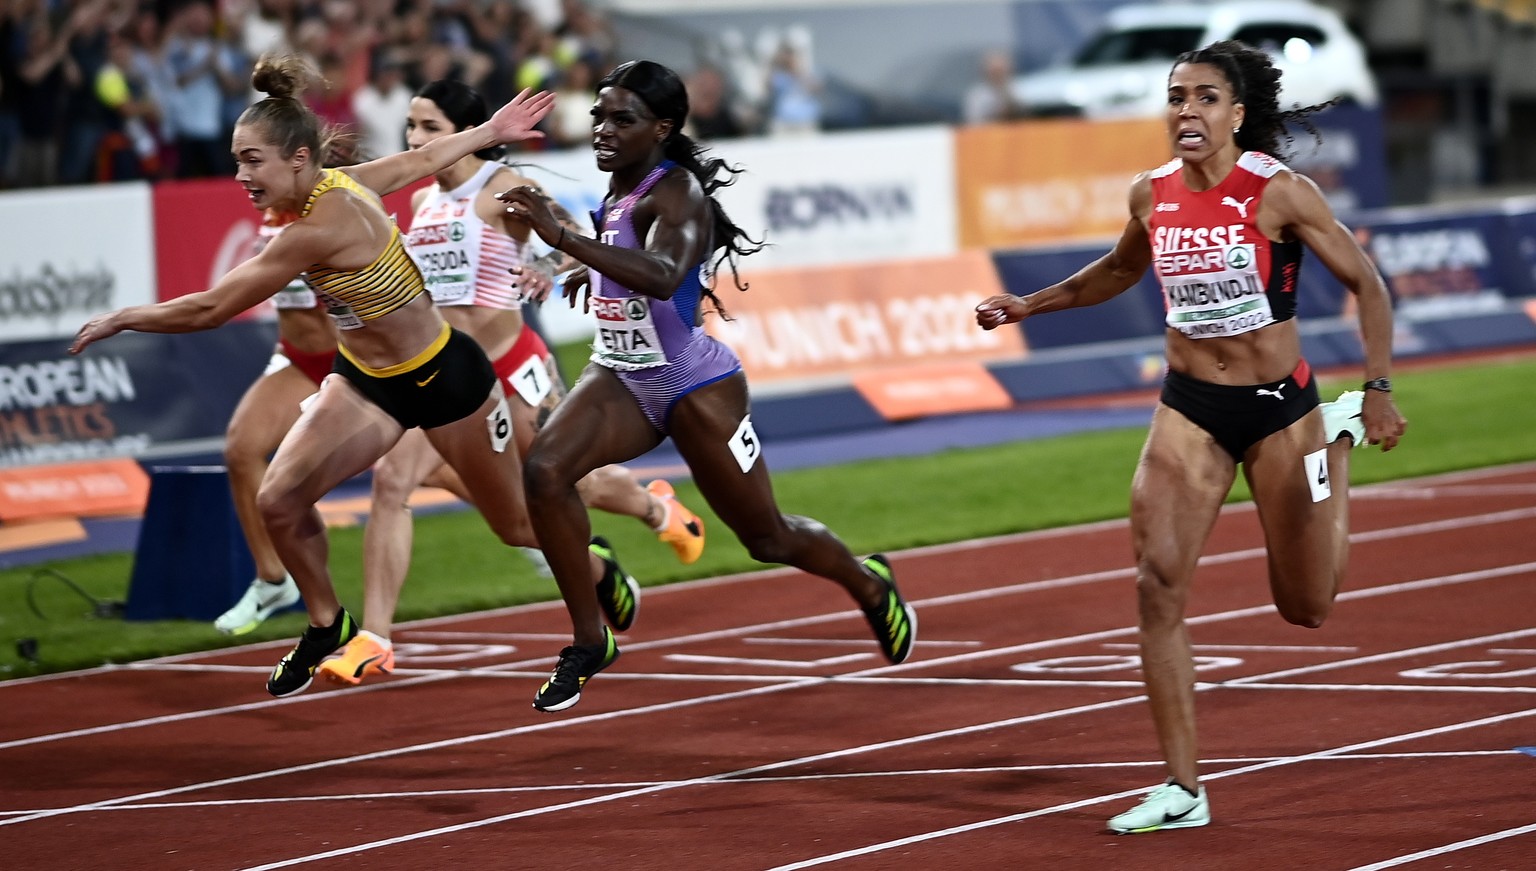 epa10124890 Gina Lueckenkemper (L) of Germany wins the women's 100m final during the Athletics events at the European Championships Munich 2022, Munich, Germany, 16 August 2022. The championships will ...